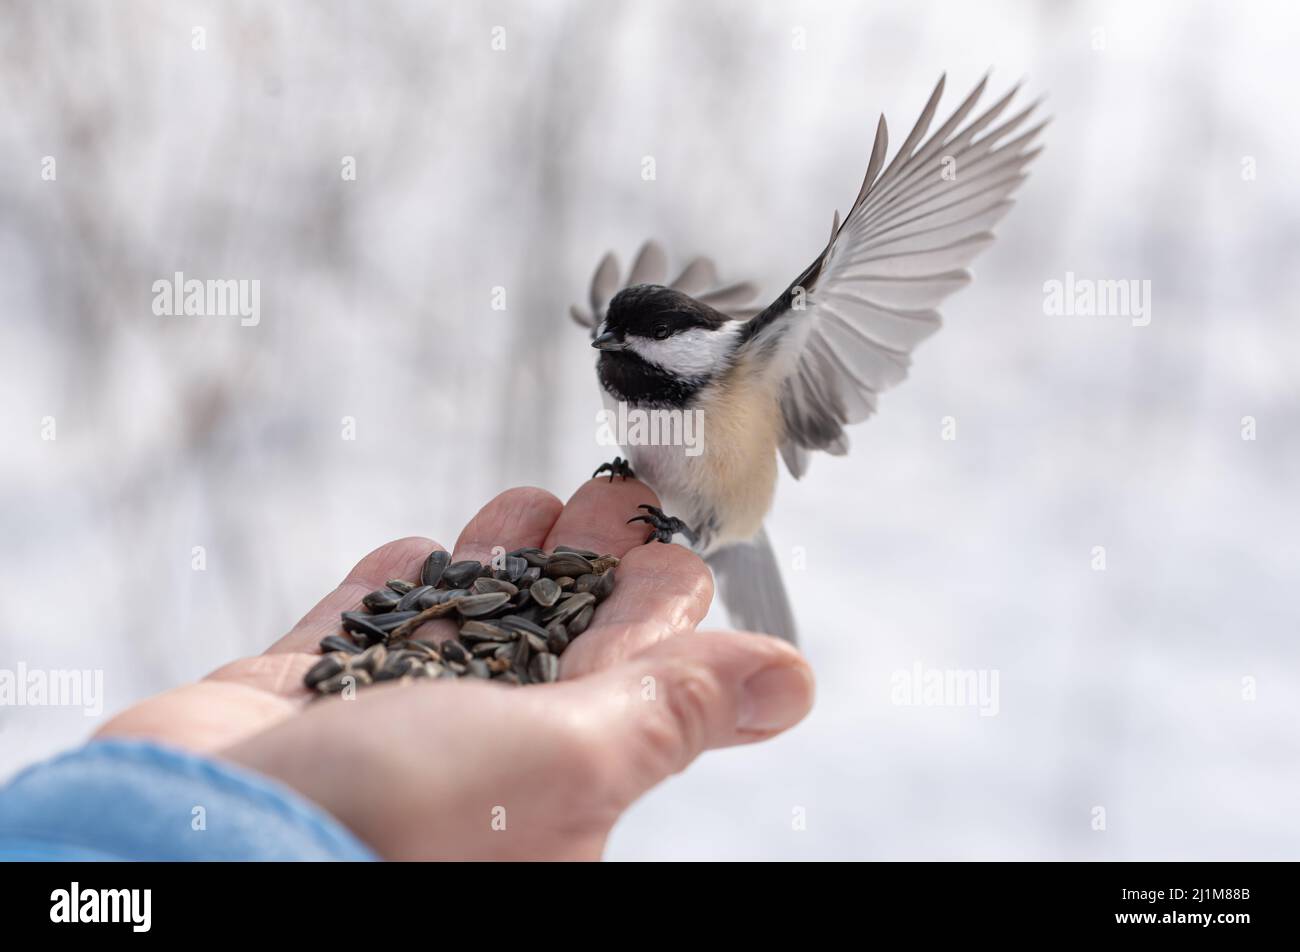 Close up of chickadee bird with outstretched wings landing on hand. Stock Photo